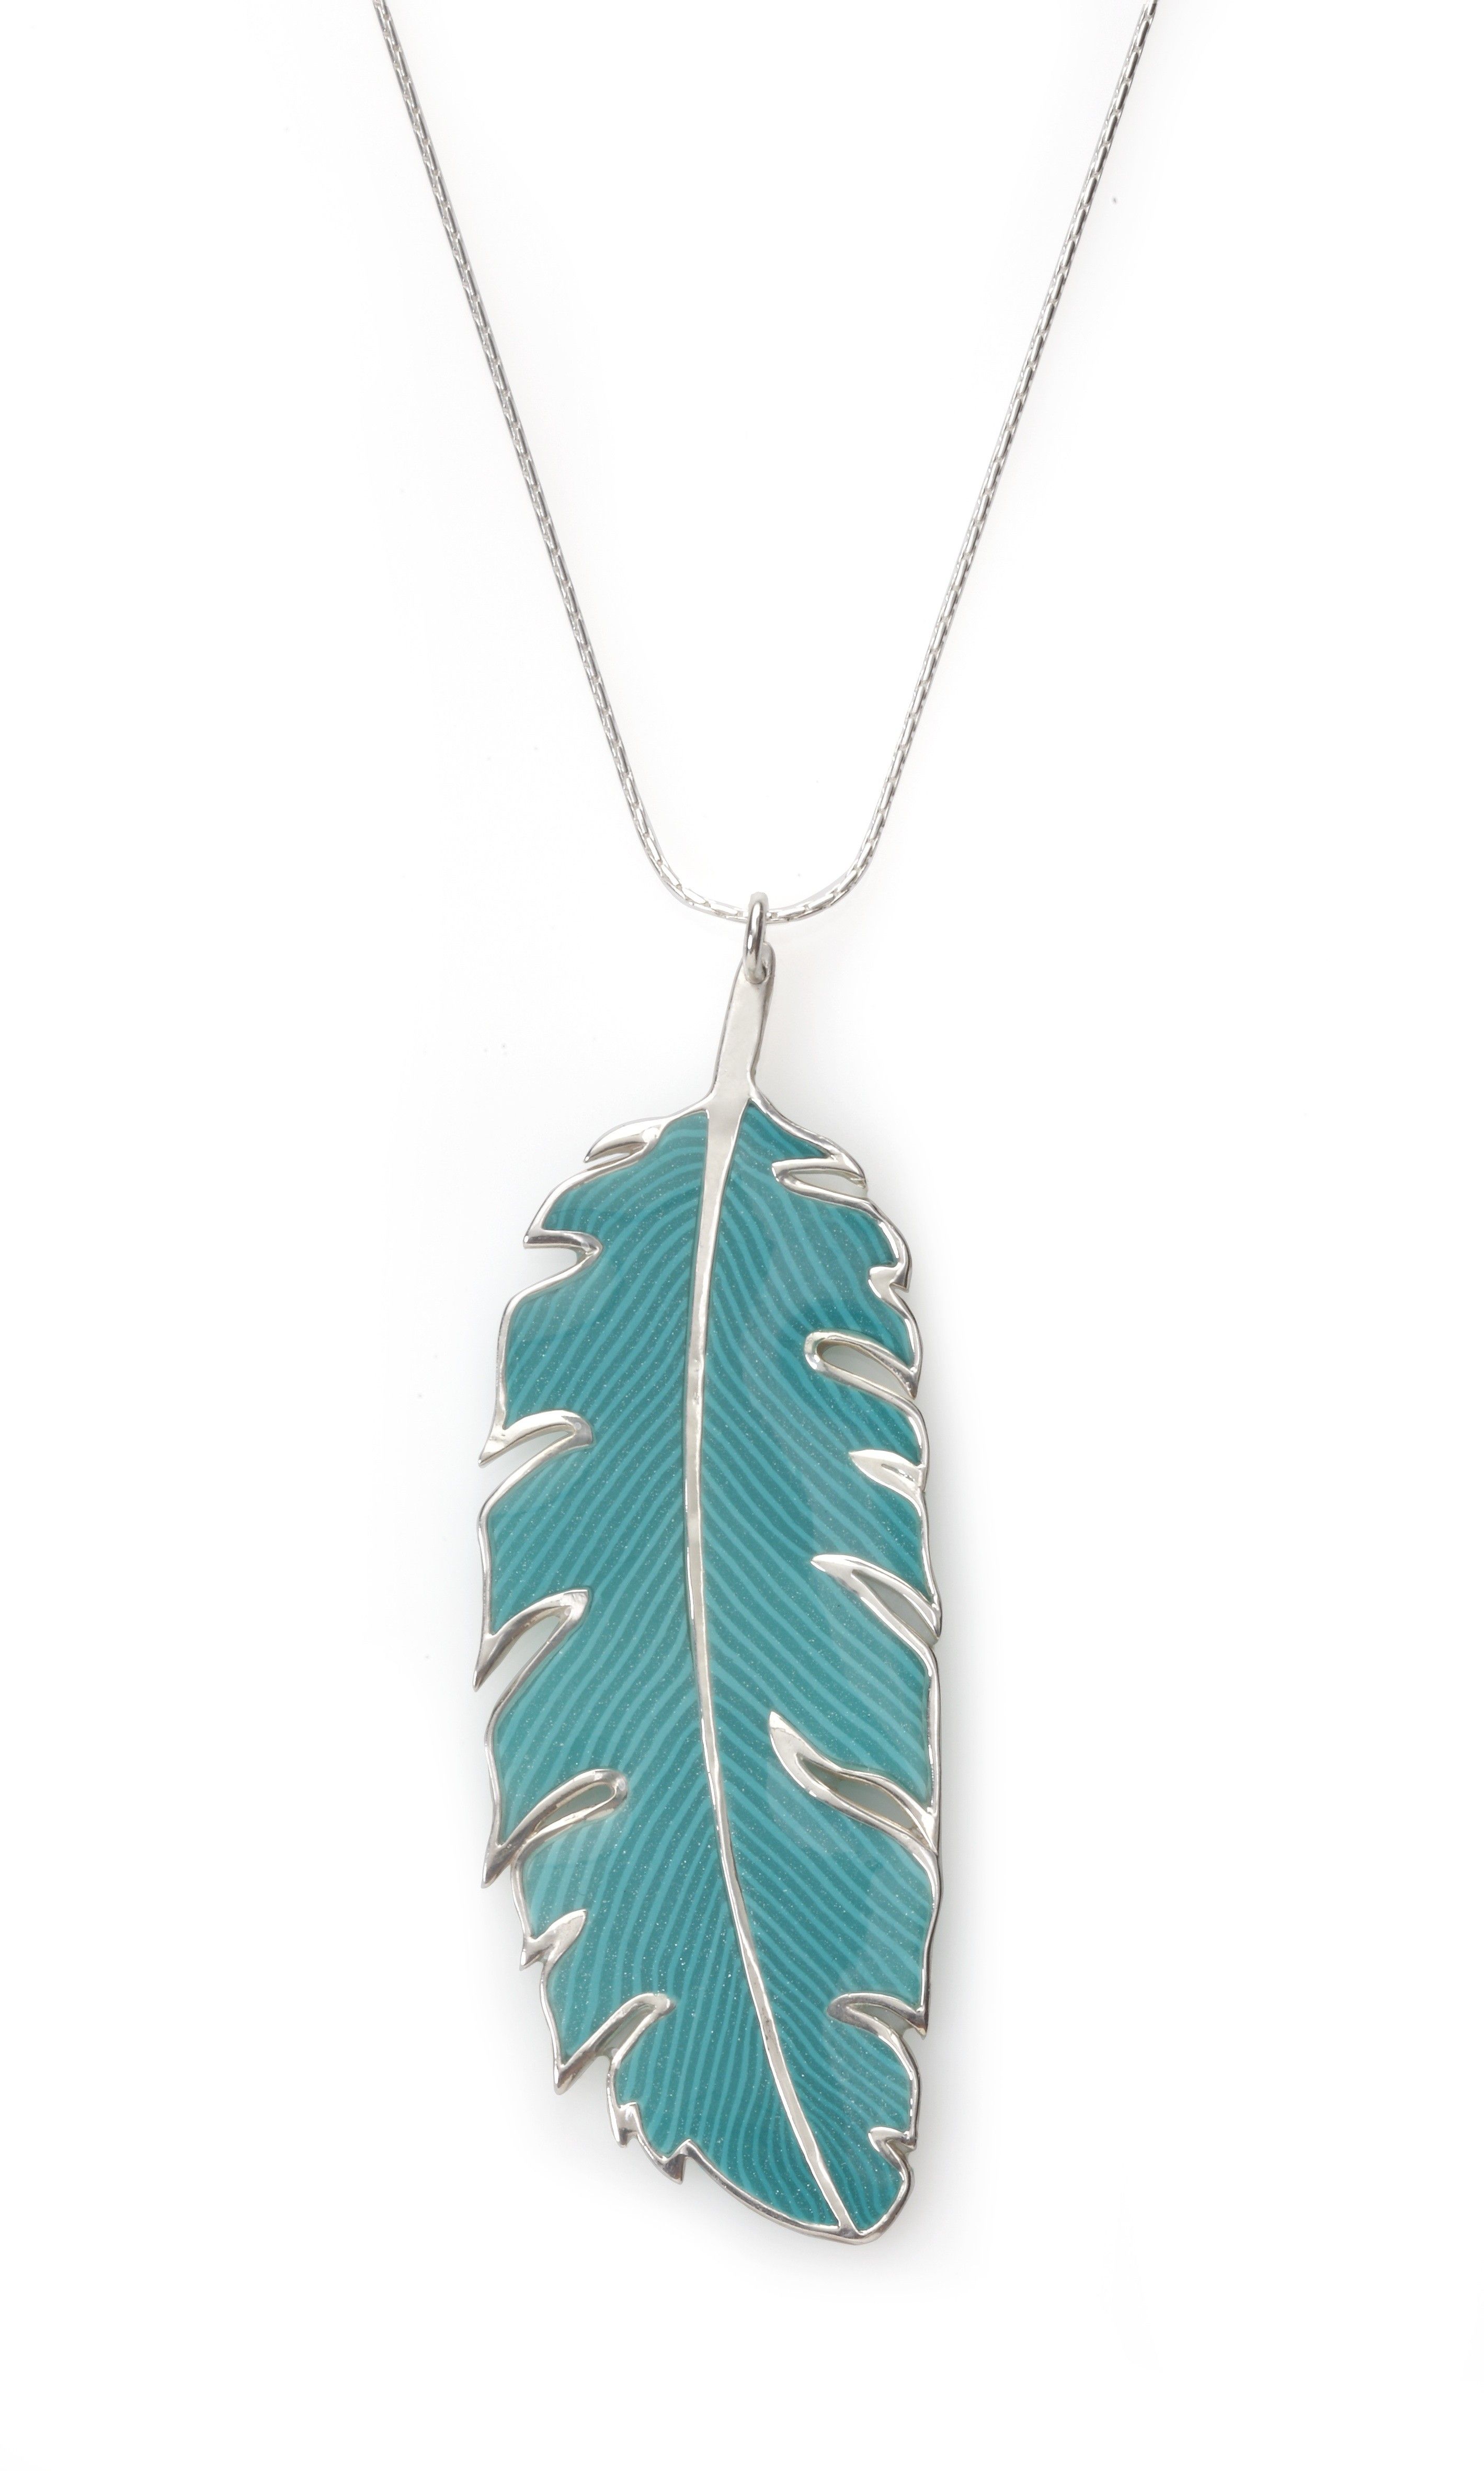 Adina Plastelina Silver Chain With Large Single Turquoise Feather Pendant For Most Recent Single Feather Pendant Necklaces (View 9 of 25)